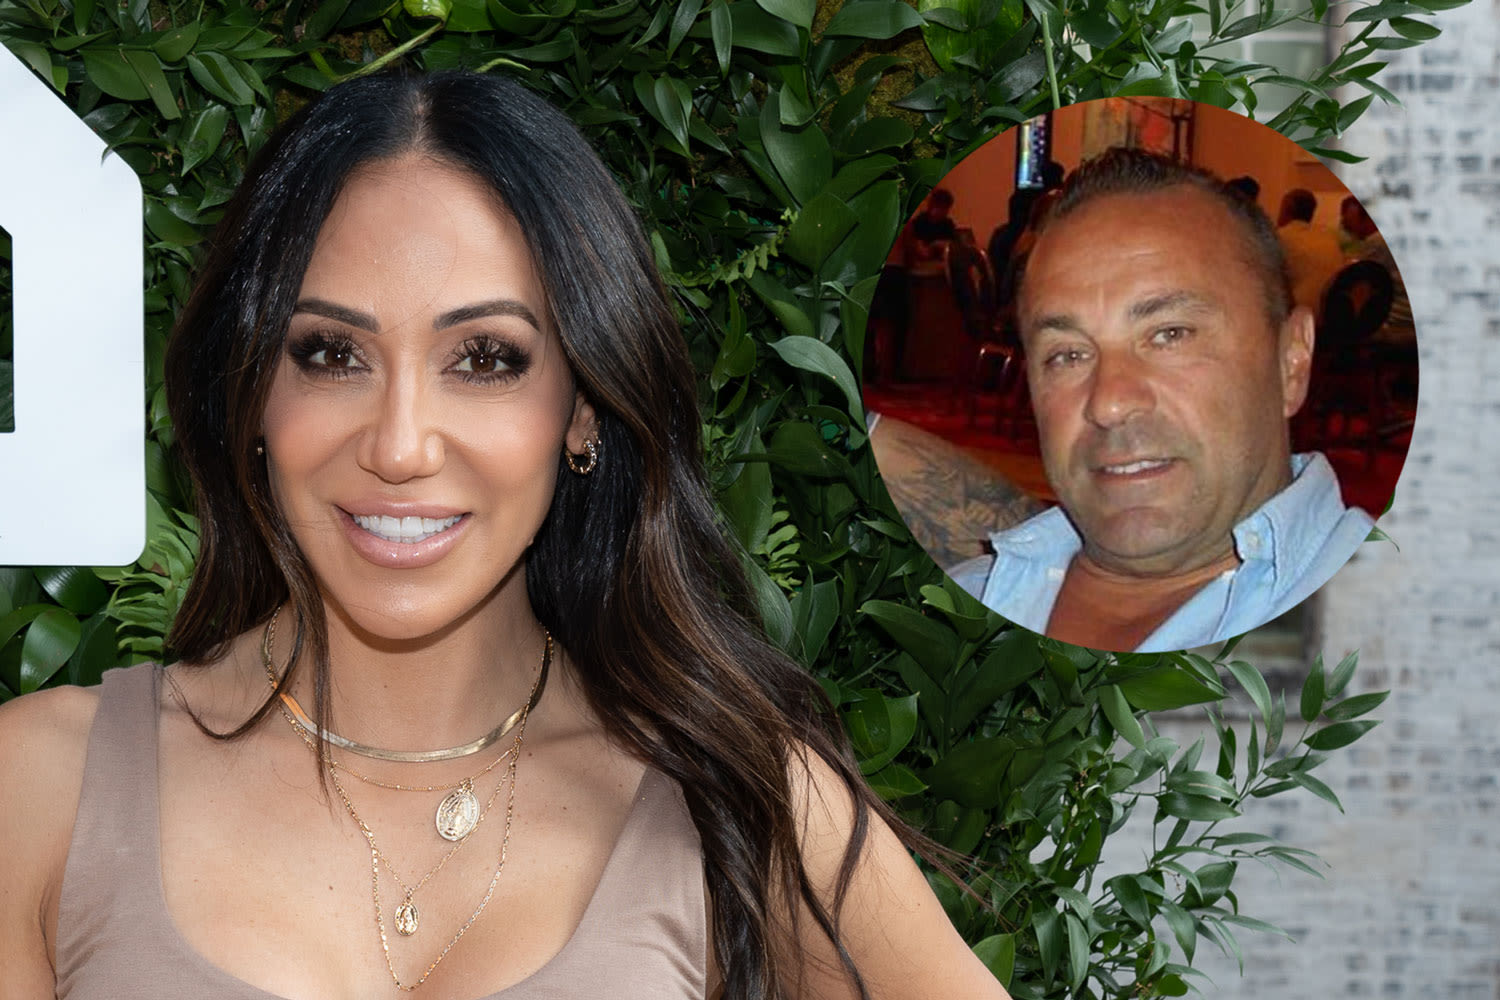 Melissa Gorga Reveals What Happened When She Saw Joe Giudice in the Bahamas: "There's Always a Spin" | Bravo TV Official Site